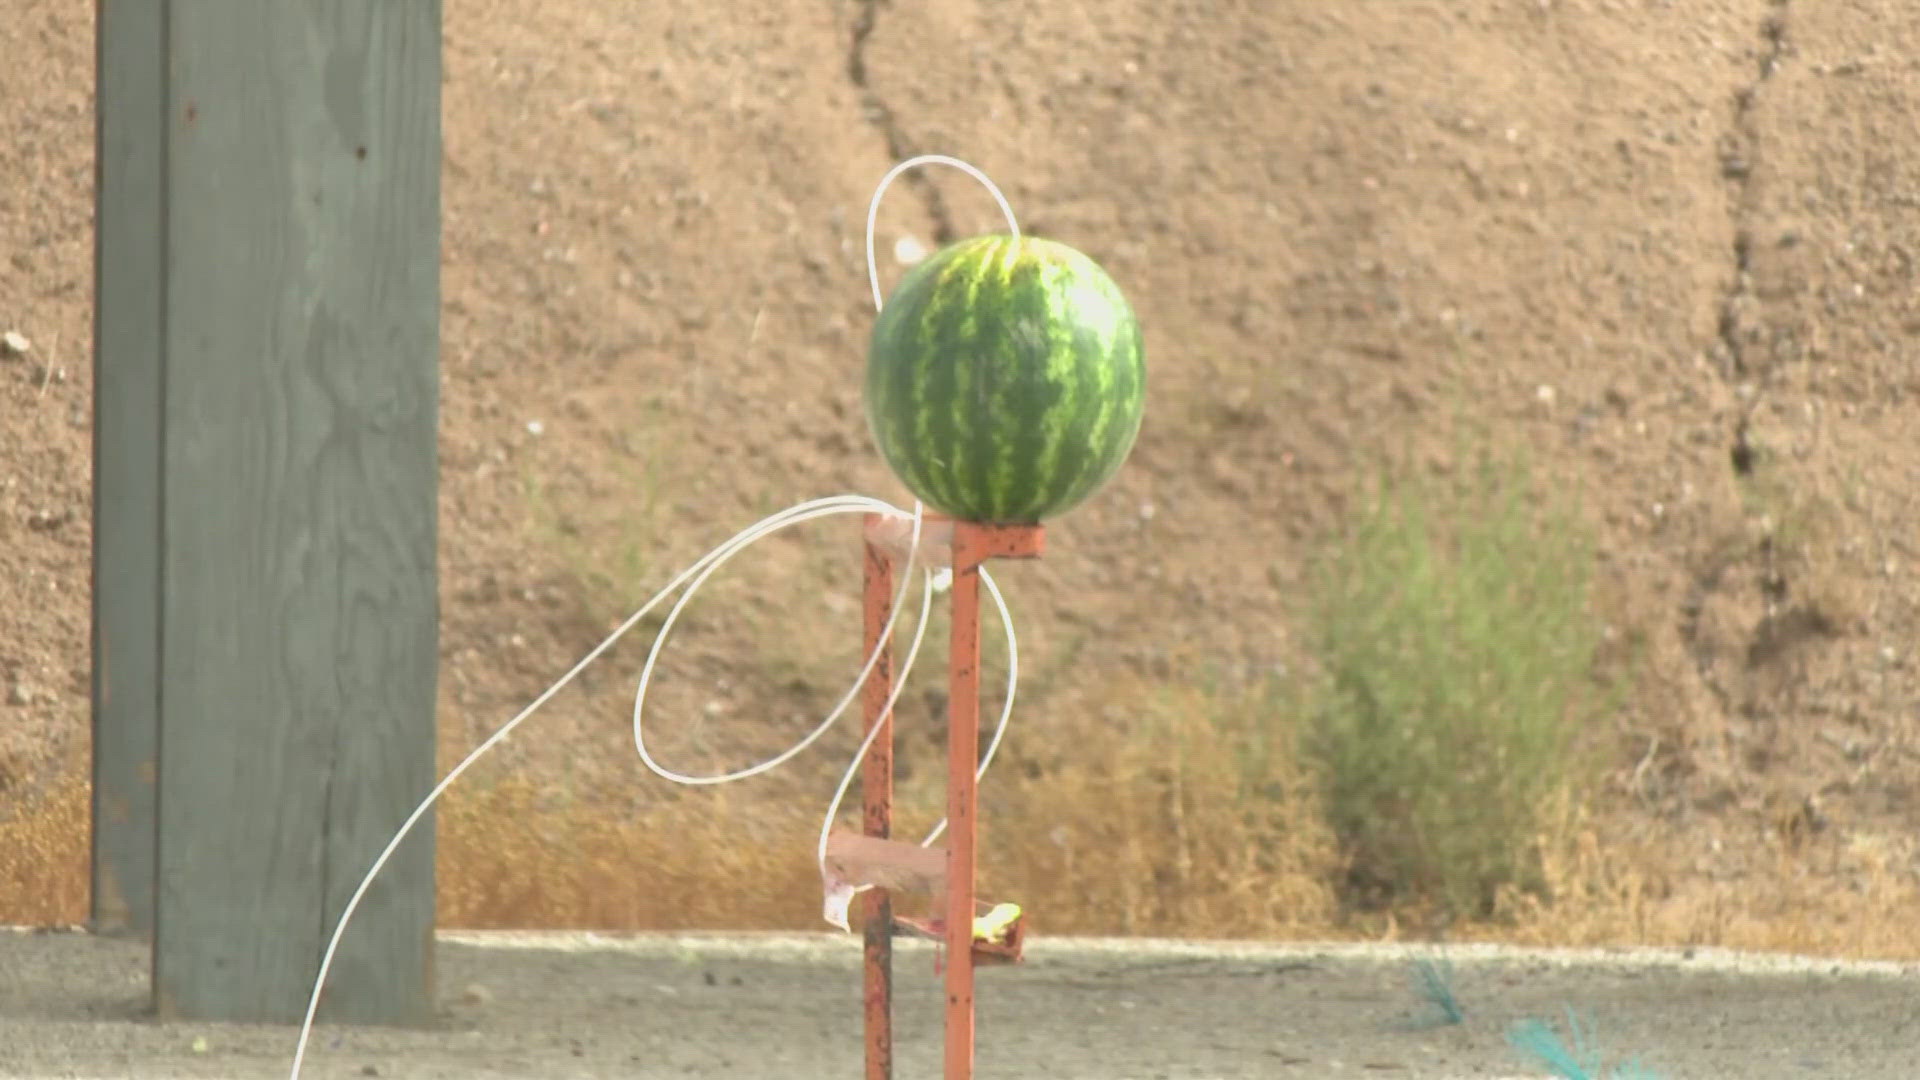 Officials used a watermelon to show the potential damage that fireworks can cause when not used properly.